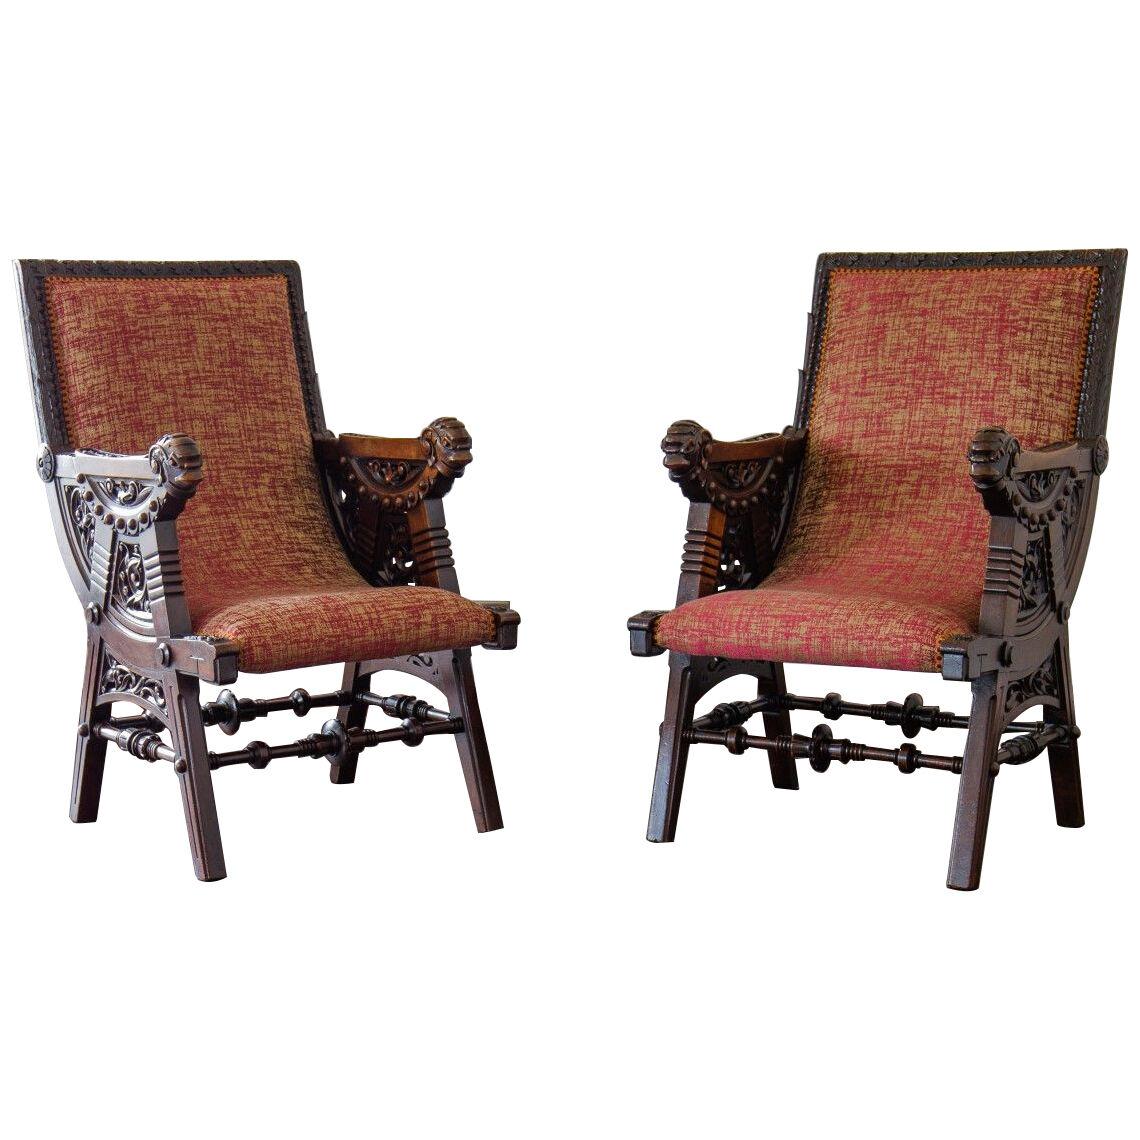 A Pair of late 19th Century French Carved Walnut Armchairs